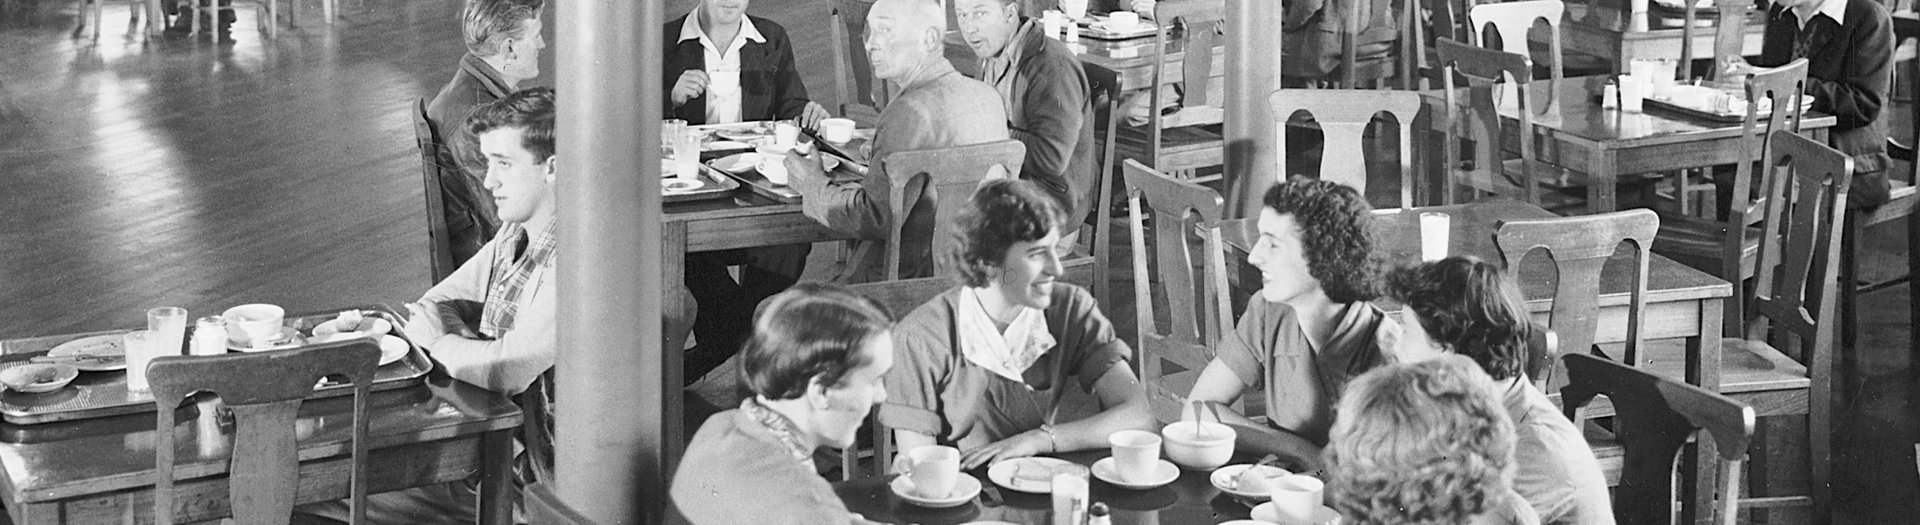 A black and white image of several groups of people sitting in chairs at tables, eating and drinking. The clothing and hairstyles are old fashioned.